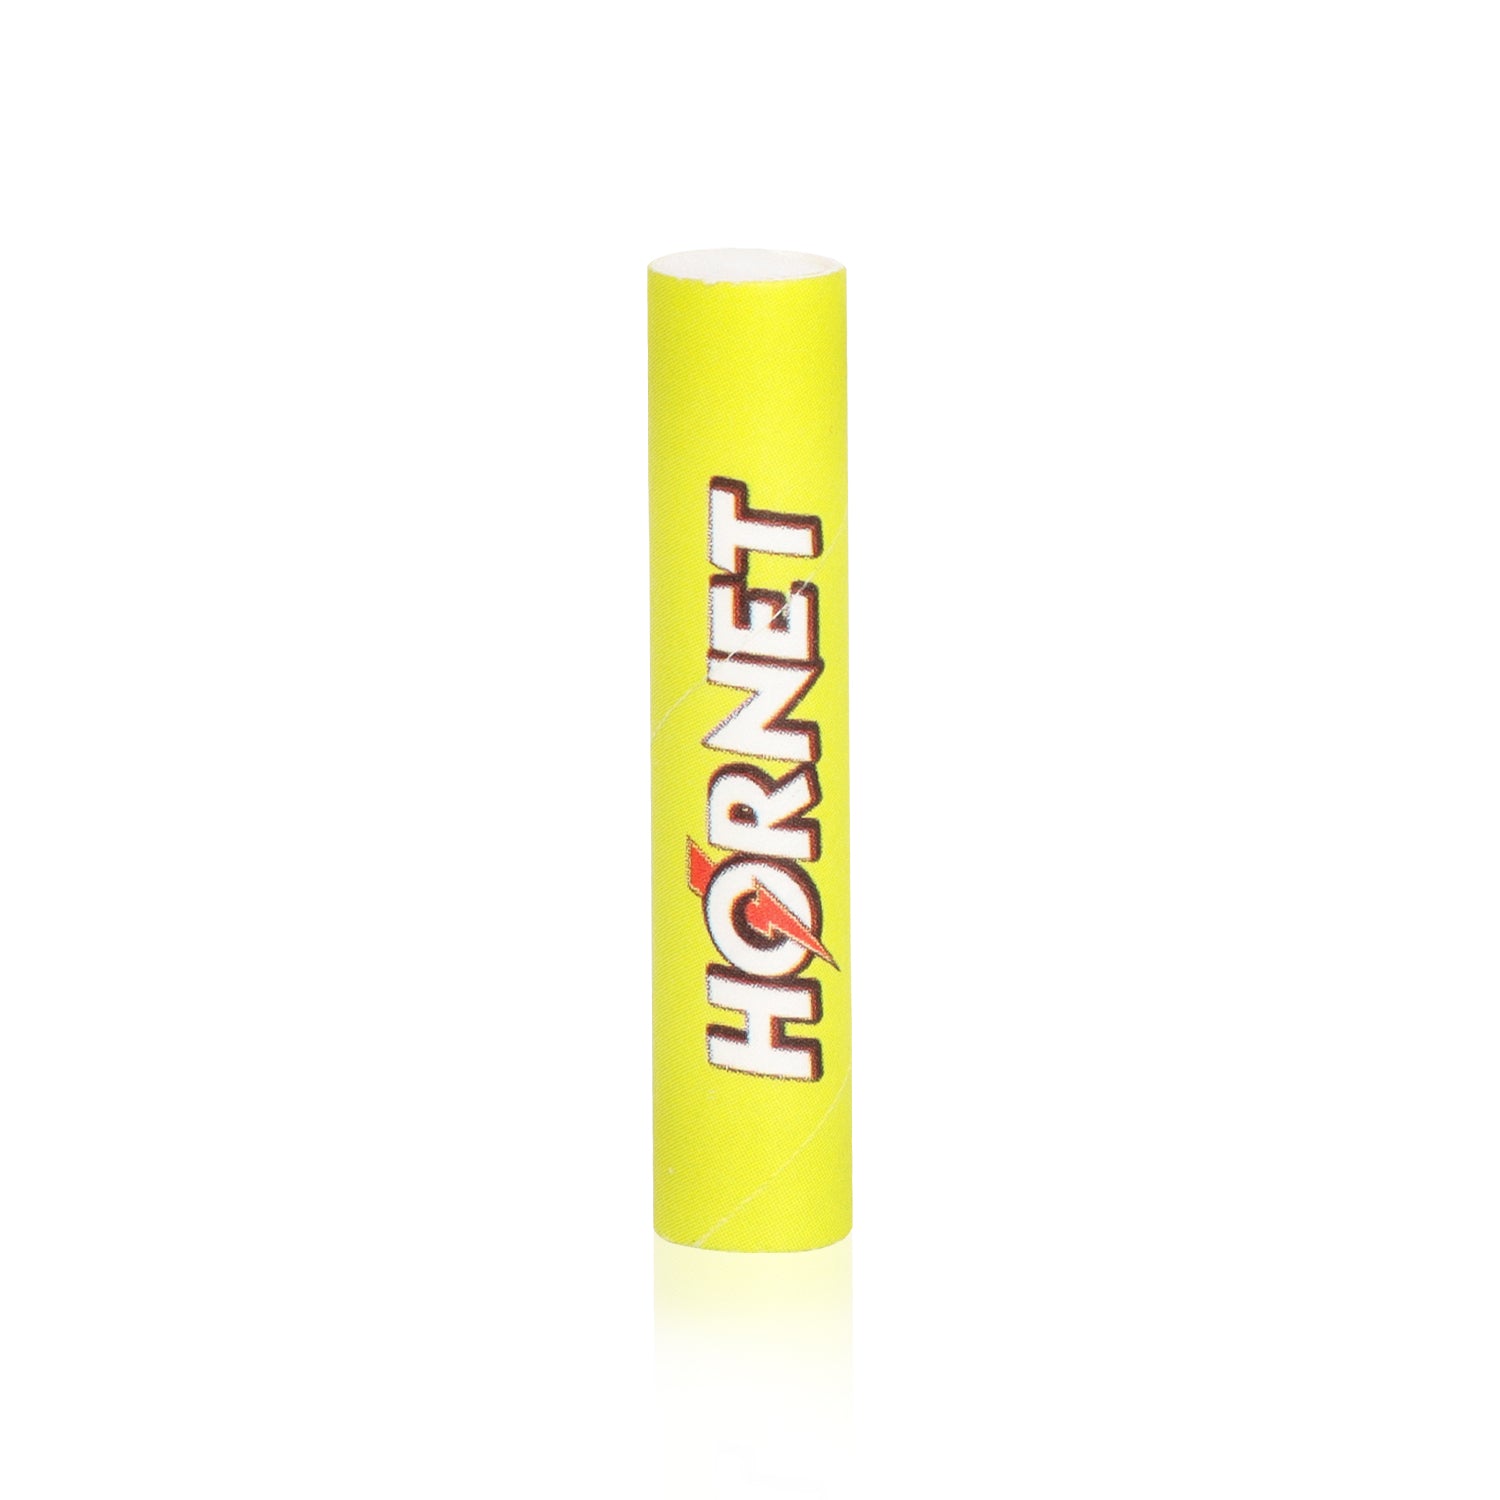 HORNET Pineapple Flavors Filter Tips with Flavored Pop, 7 mm Filter Tips, 10 Tips / Pack 24 Packs / Box